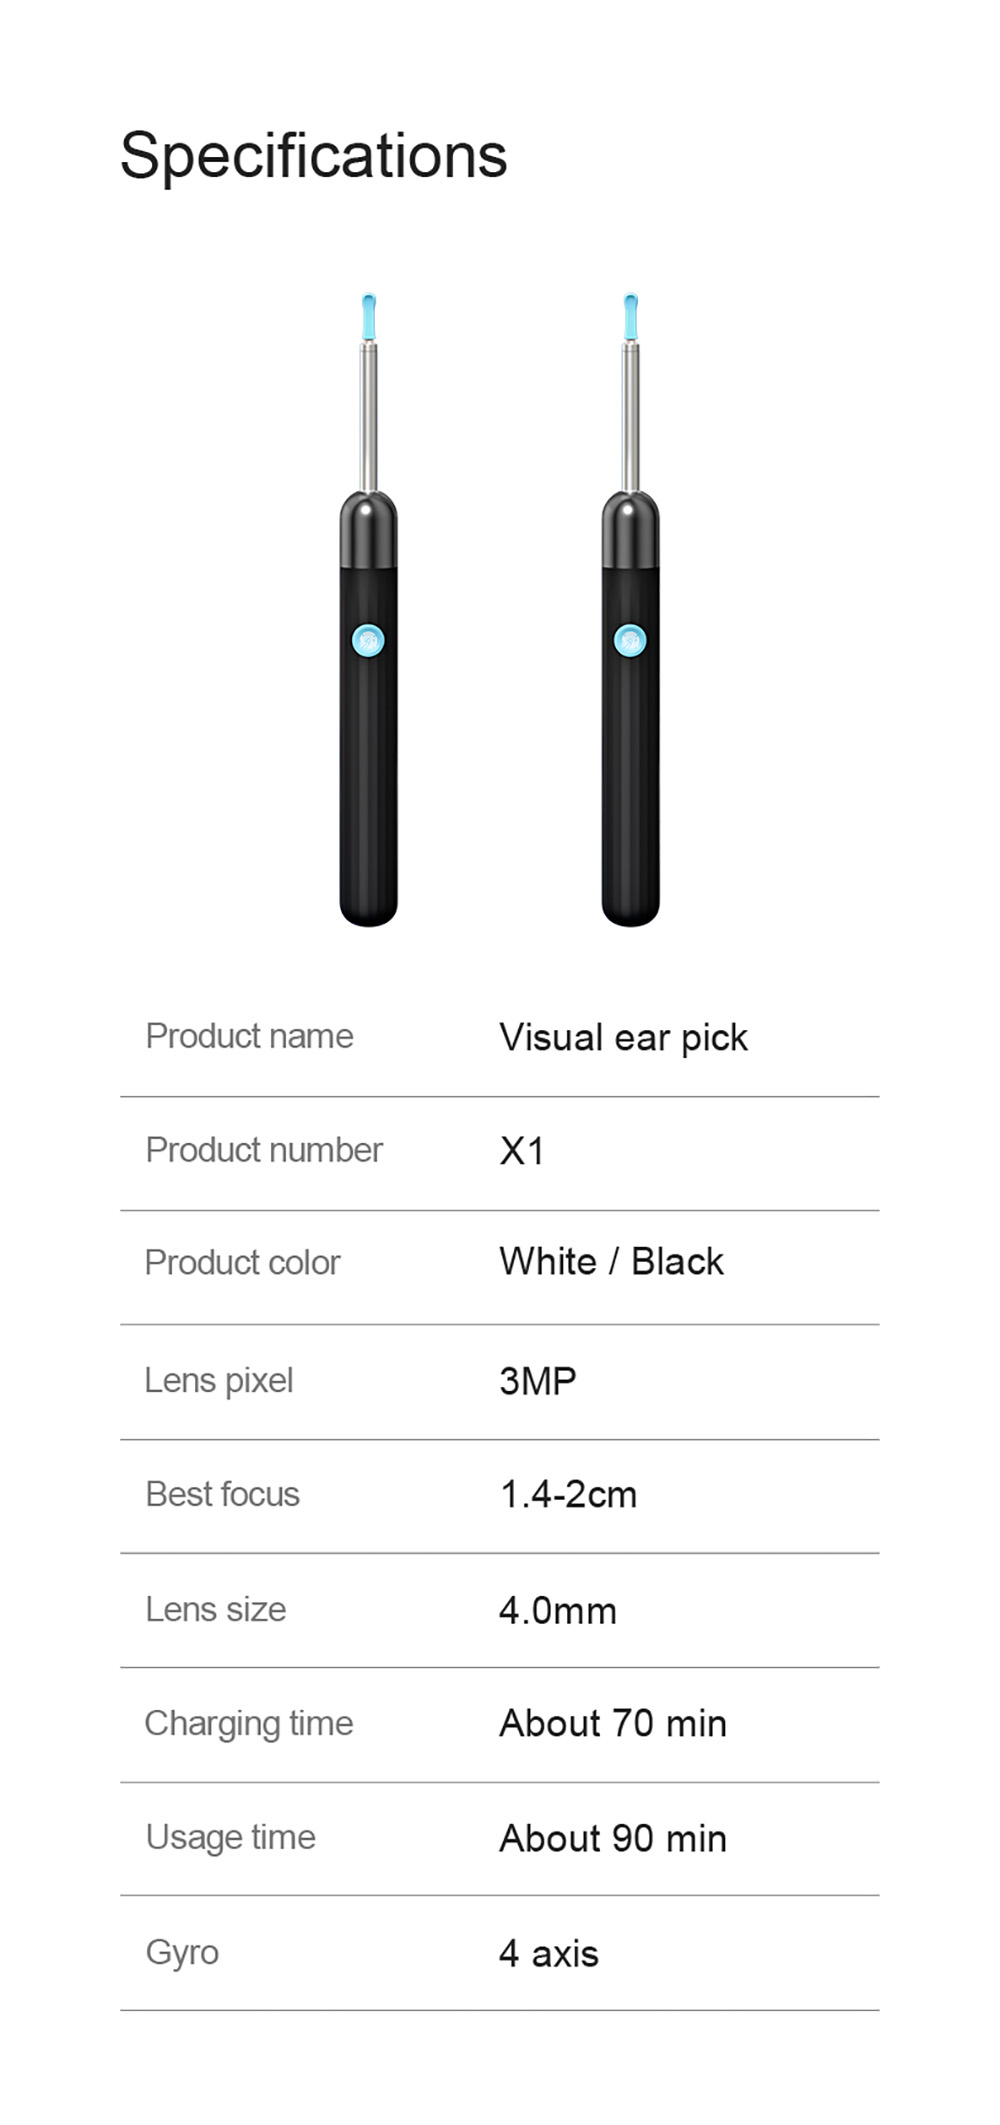 SUNUO X1 Smart Visual Ear Cleaner, 3MP HD Camera, 240mAh Rechargeable Battery, Silicone Ear Pick, IP67 Waterproof